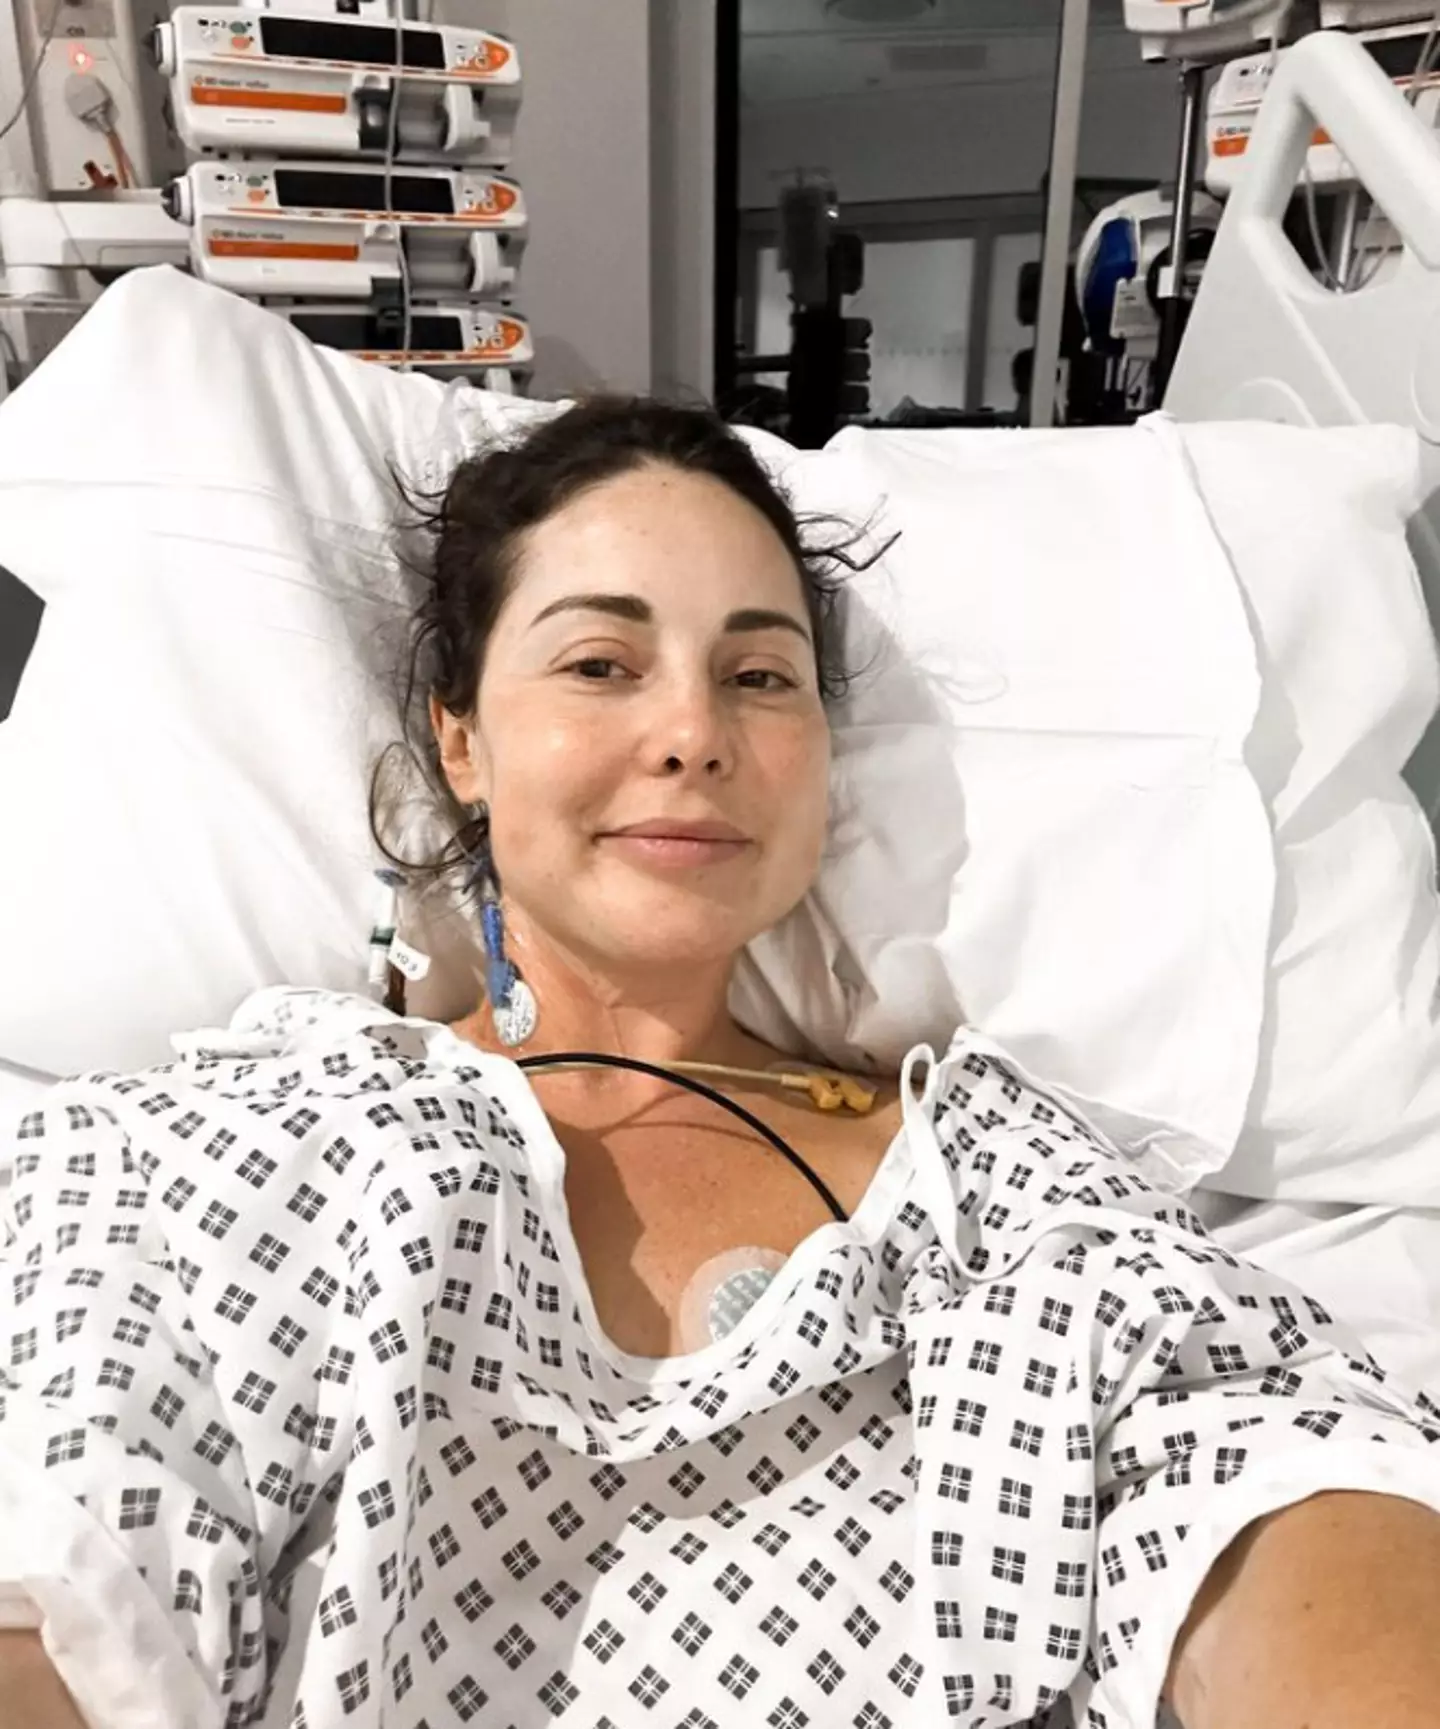 Louise Thompson has struggled with her health for years. (@louise.thompson/Instagram)